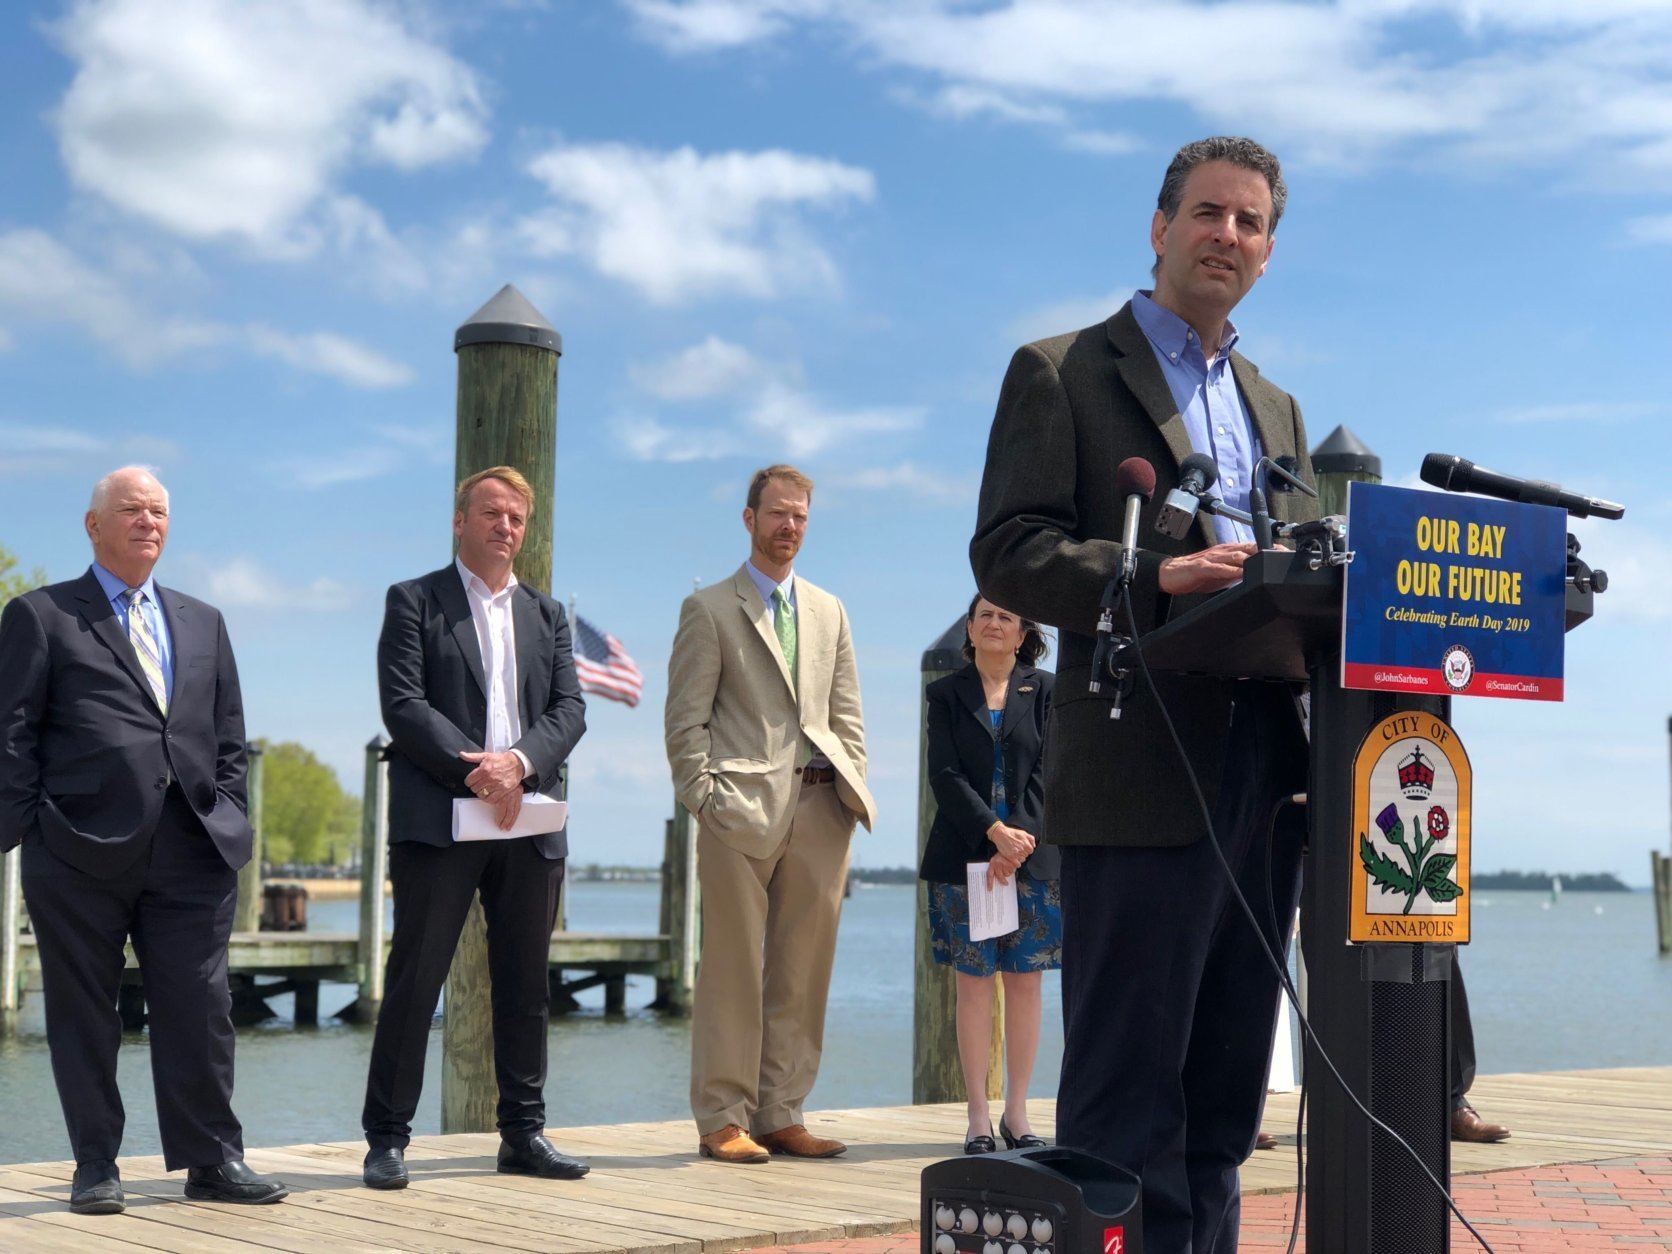 US Rep John Sarbanes addresses the crowd at the Earth Day event in Annapolis. (WTOP/Kate Ryan)